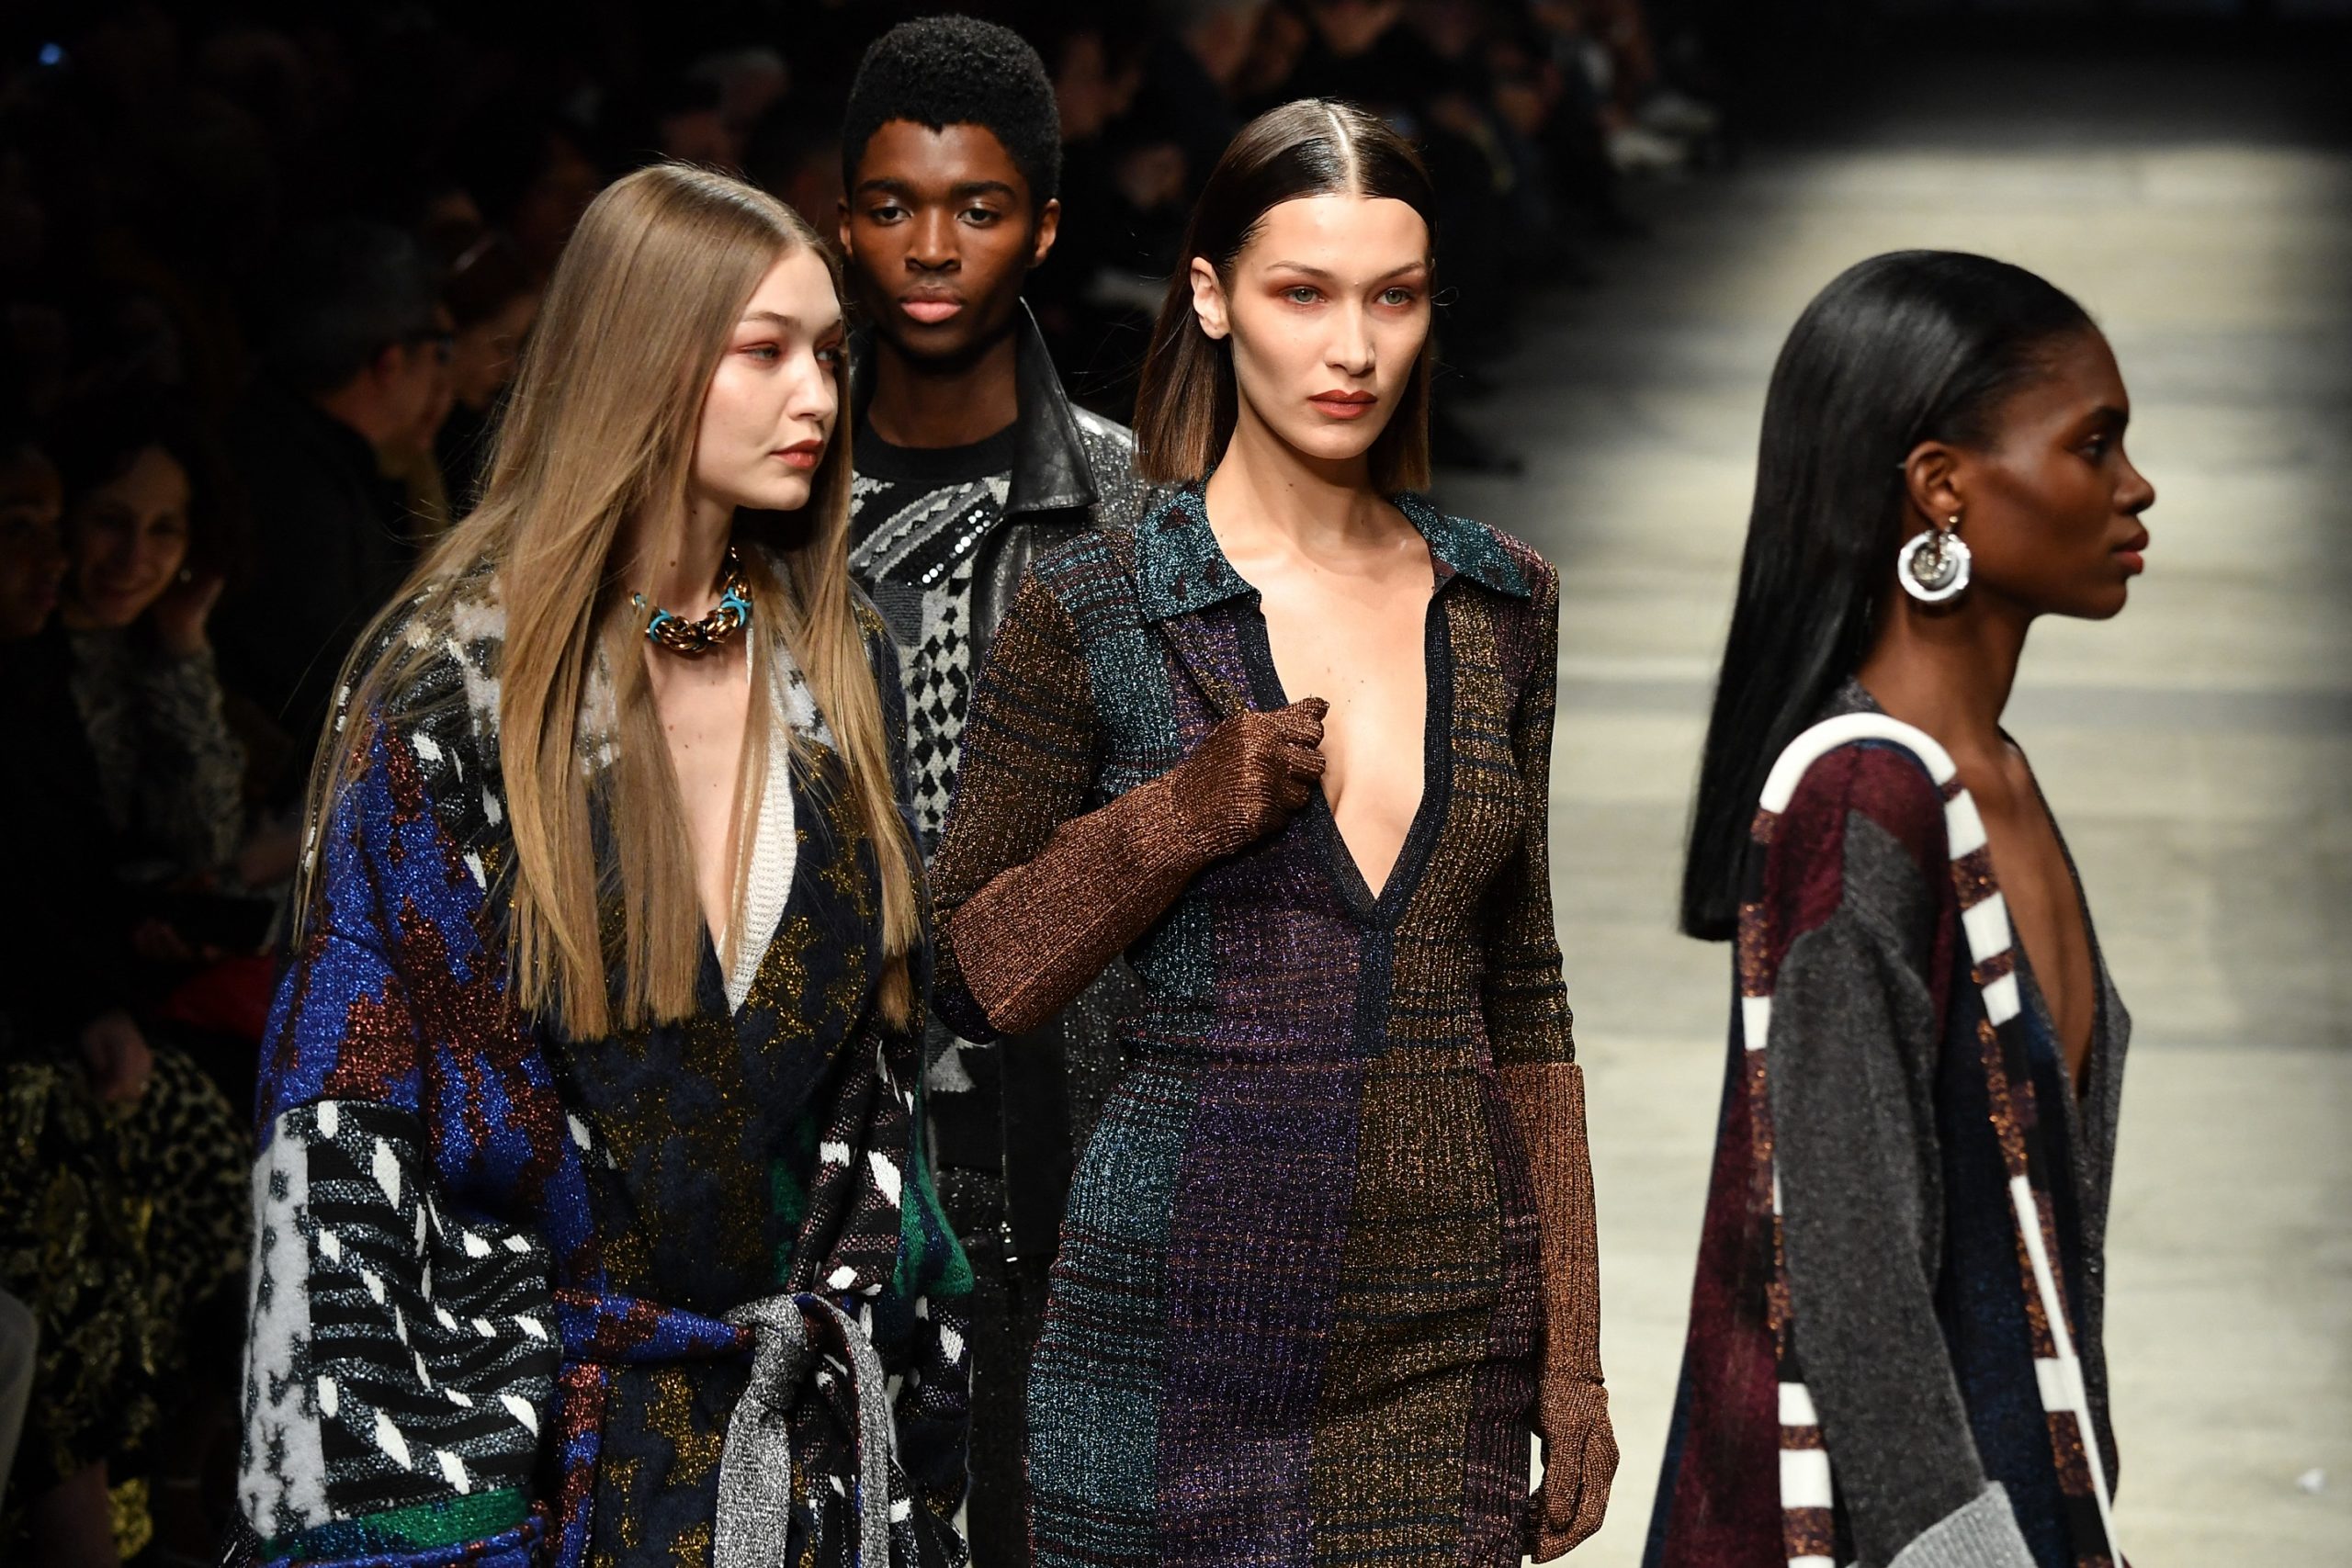 Kendall Jenner, Bella and Gigi Hadid star in Burberry's latest